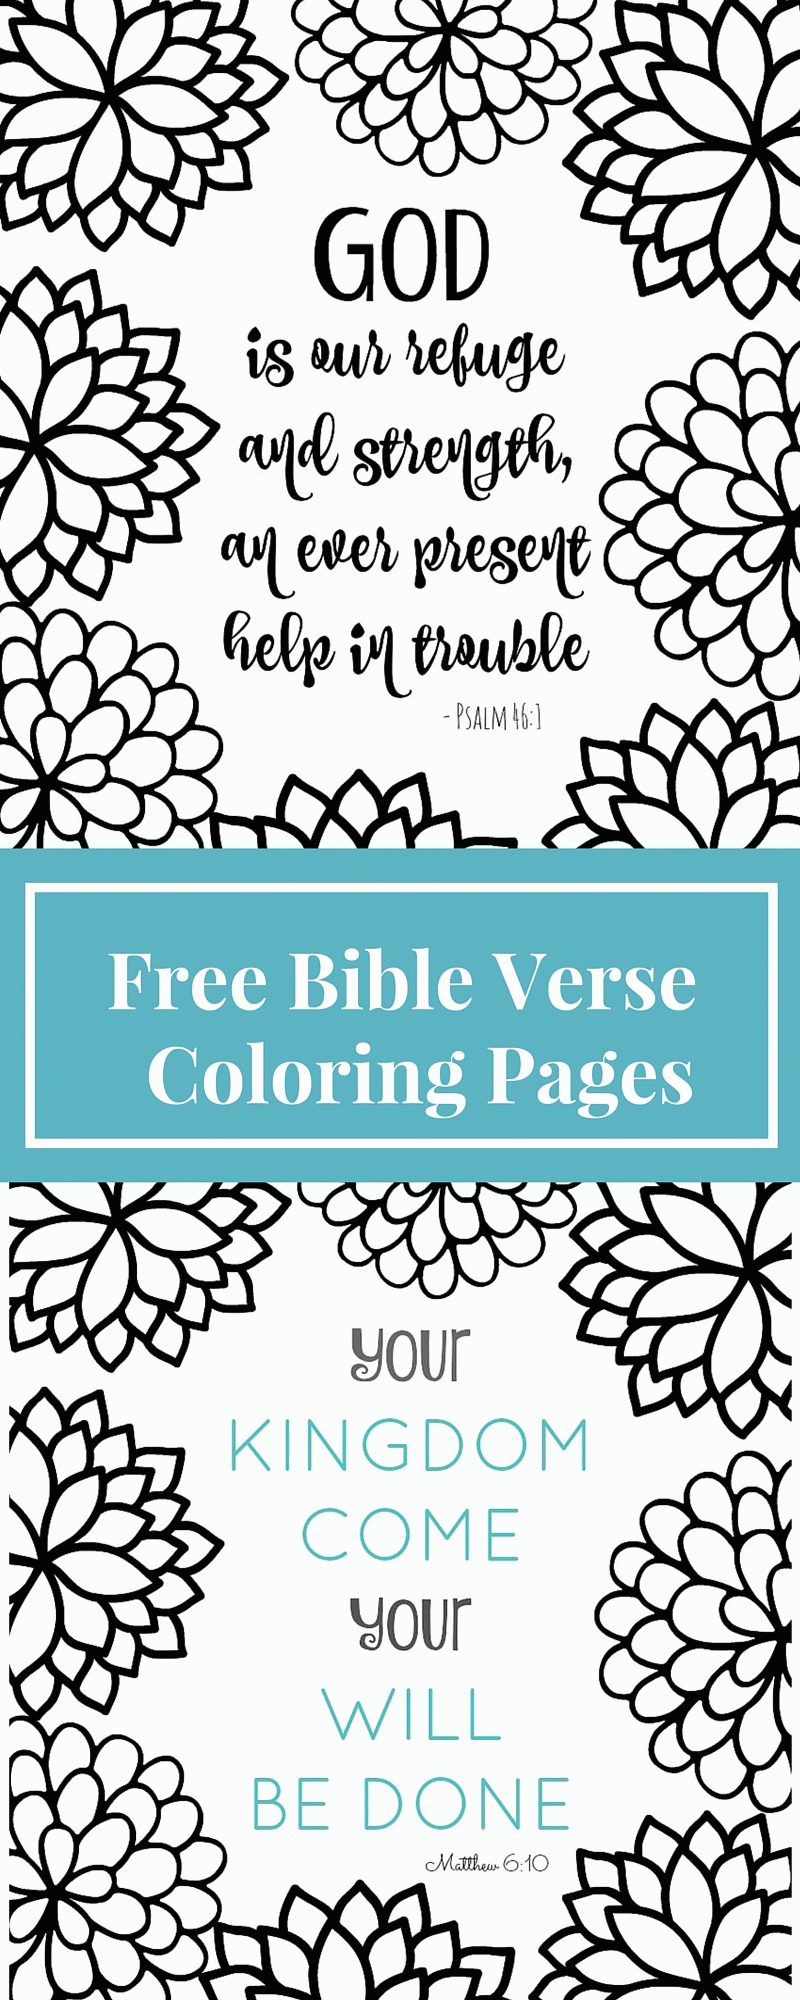 Free Printable Bible Verse Coloring Pages with Bursting Blossoms -